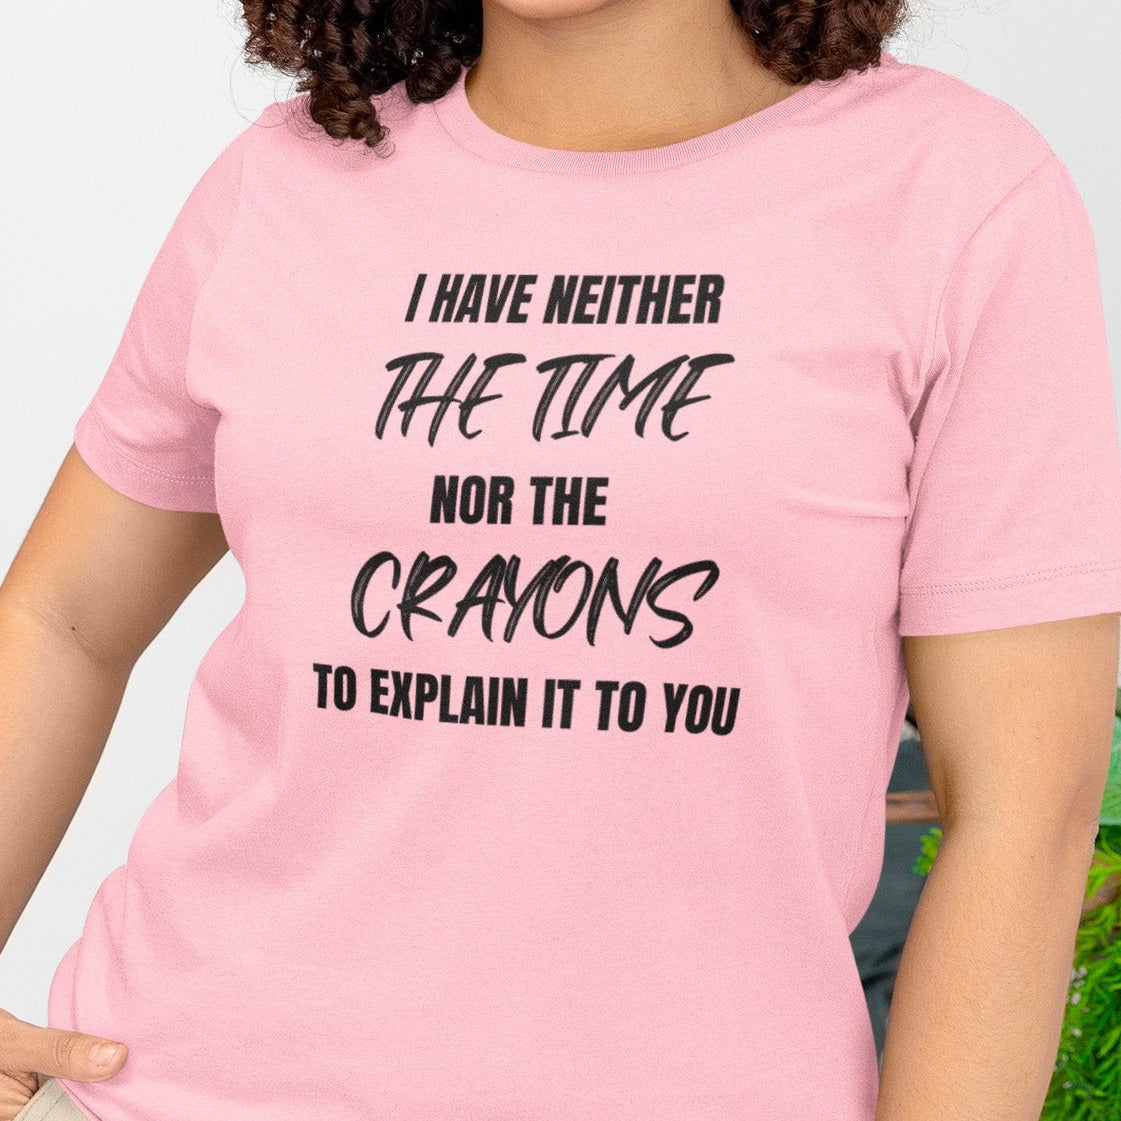 i-have-neither-the-time-nor-the-crayons-to-explain-it-to-you-pink-bella-canvas-t-shirt-mockup-featuring-a-smiling-woman-with-curly-hair